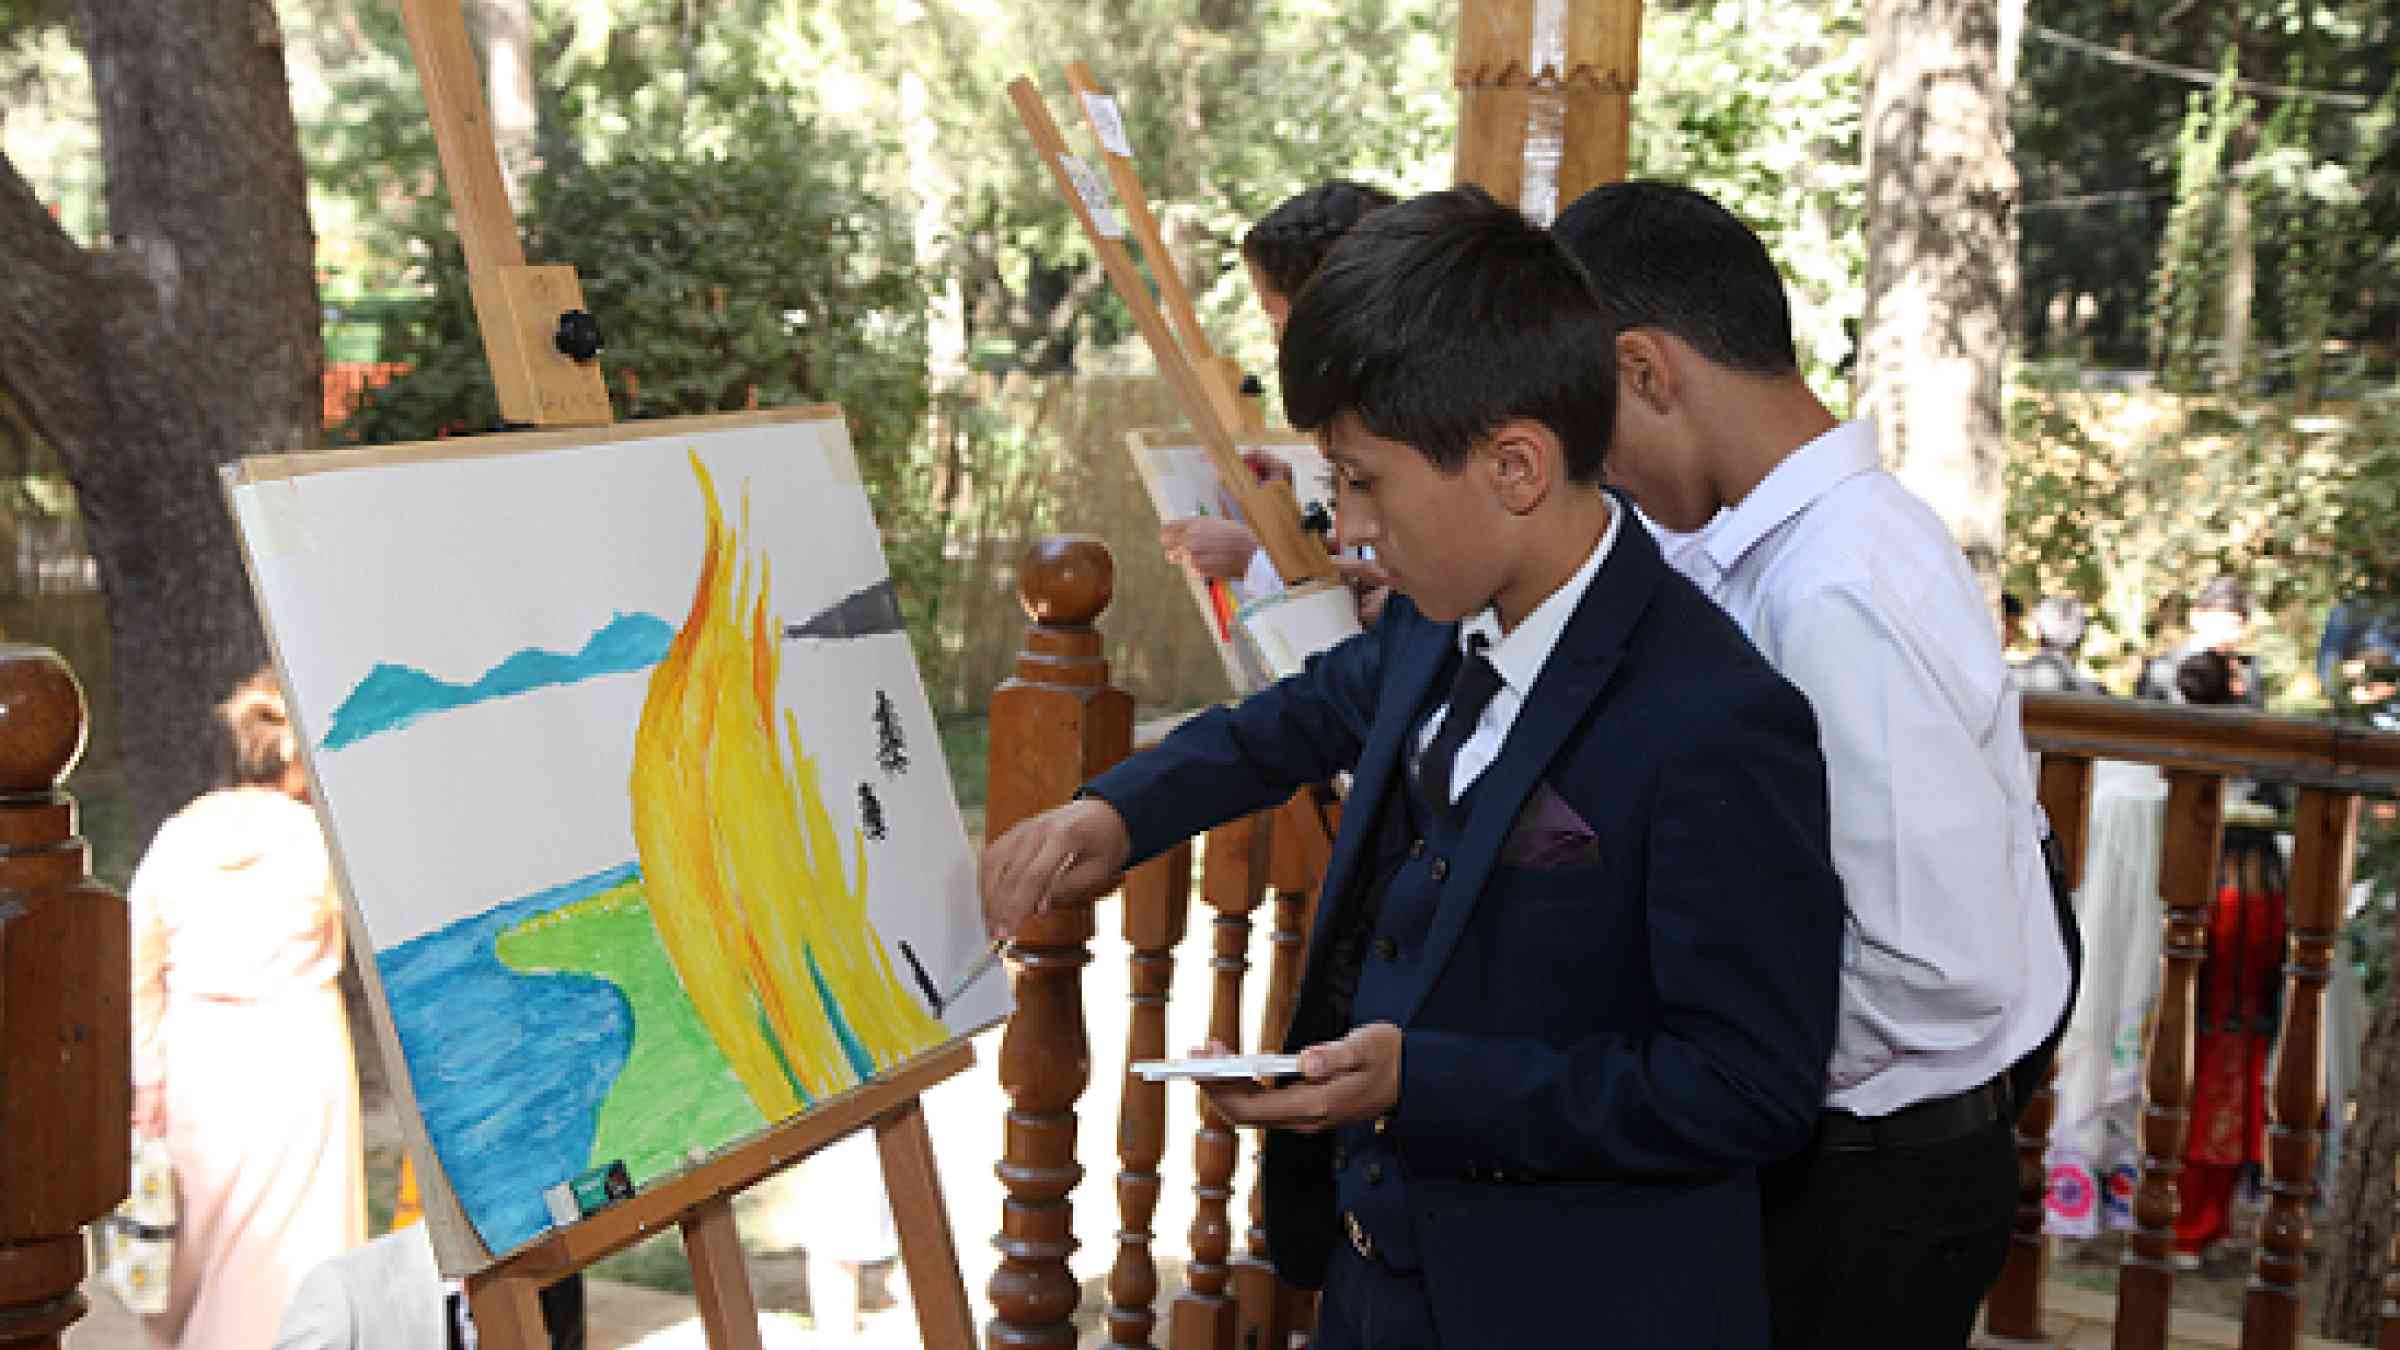 Children drawing contest